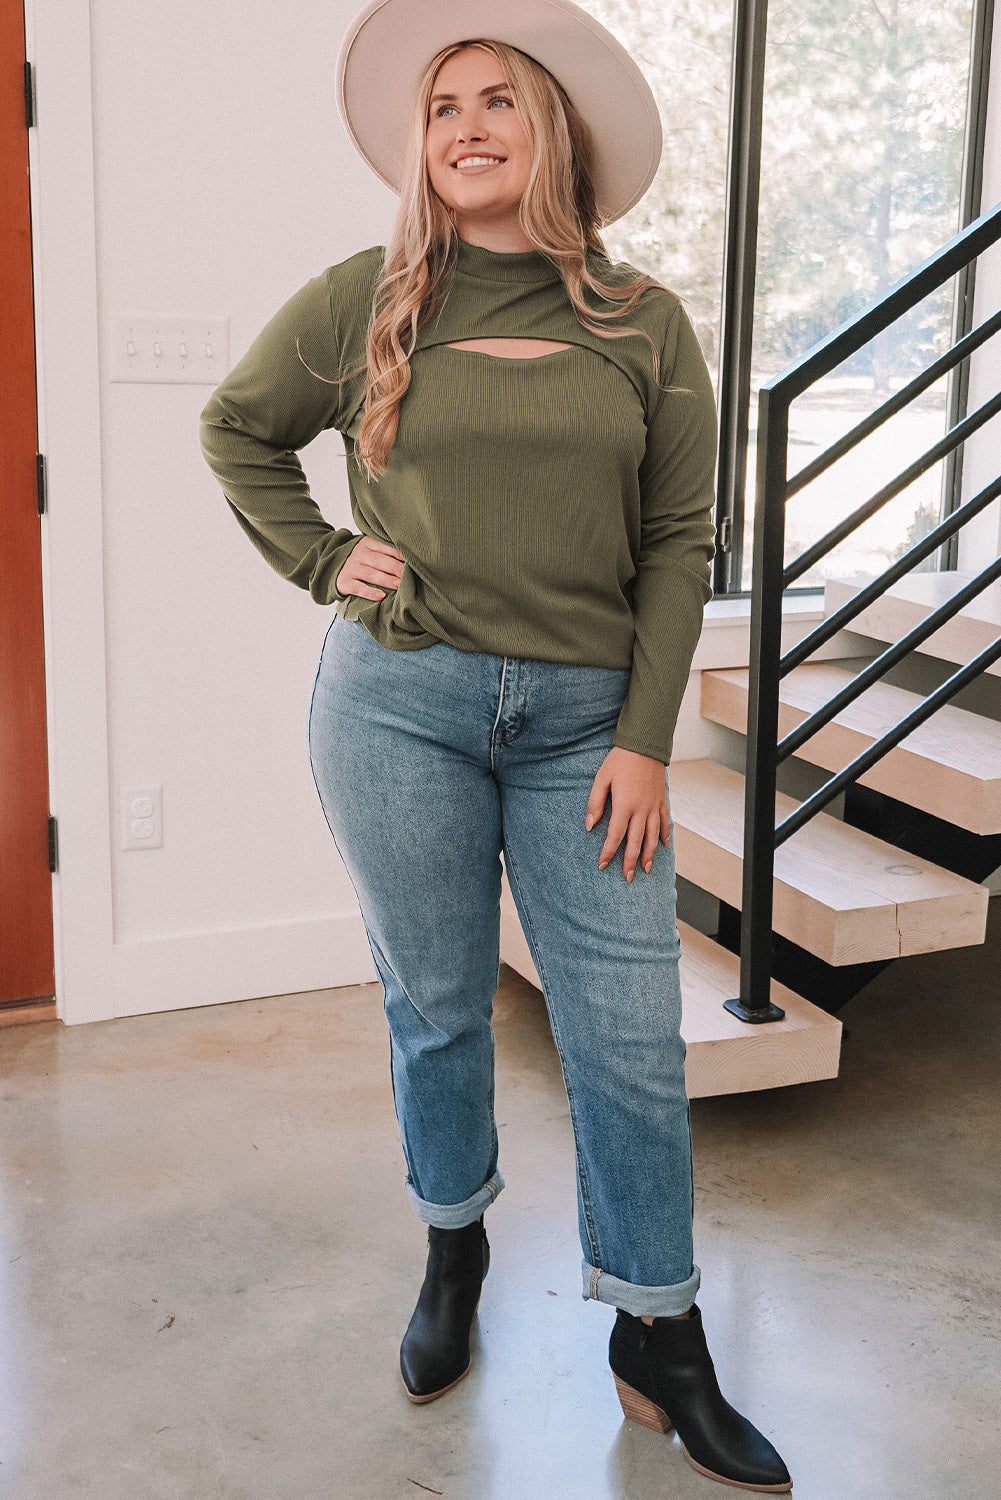 Green Plus Size Ribbed Mock Neck Peek-A-Boo Cut Out Top